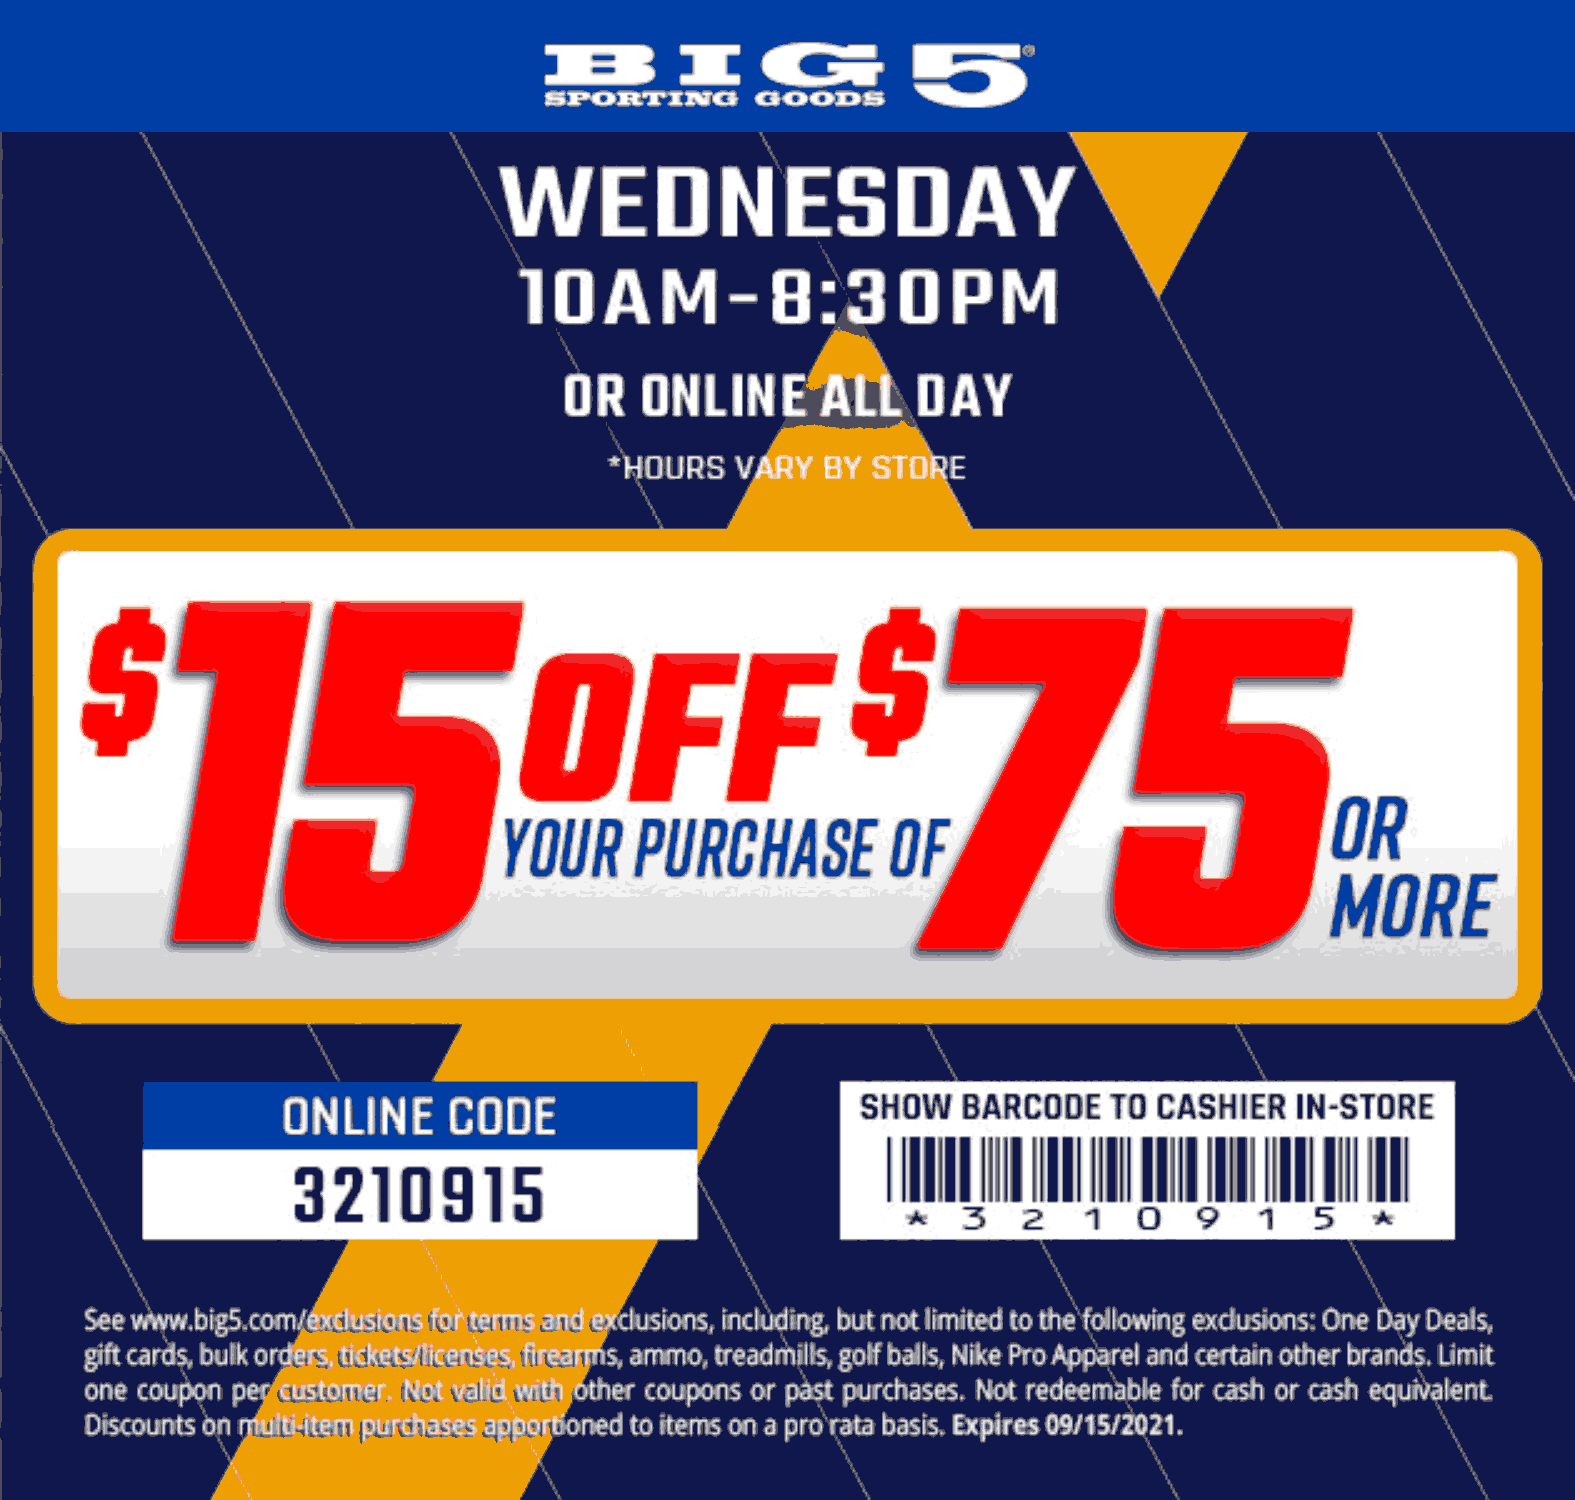 Big 5 stores Coupon  $15 off $75 today at Big 5 sporting goods, or online via promo code 3210915 #big5 